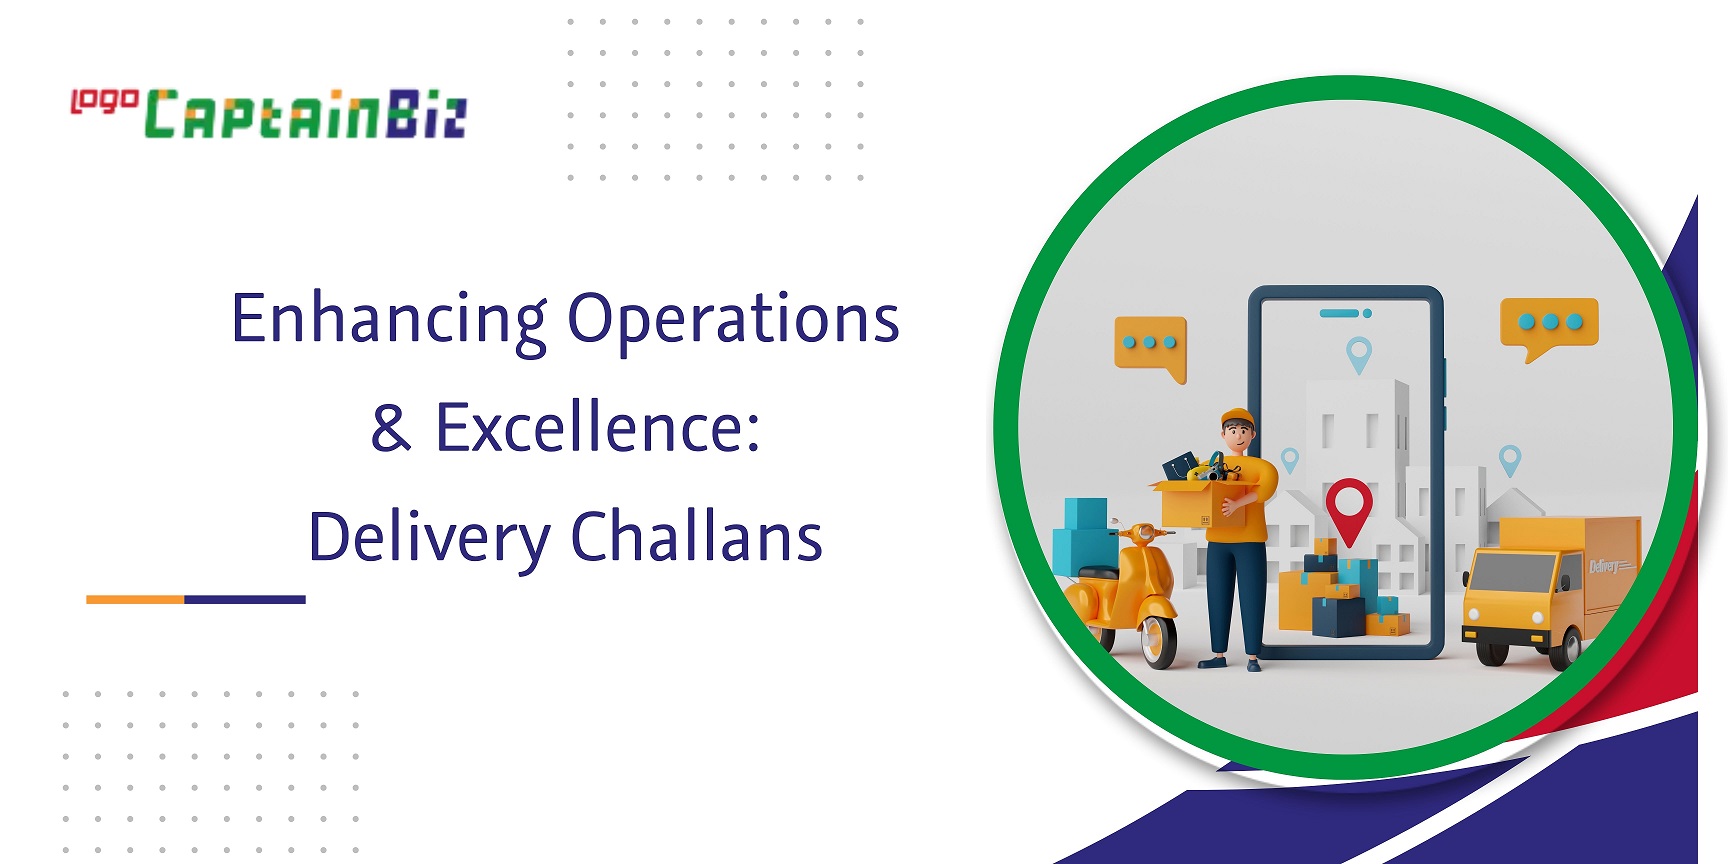 CaptainBiz: enhancing operations & excellence delivery challans